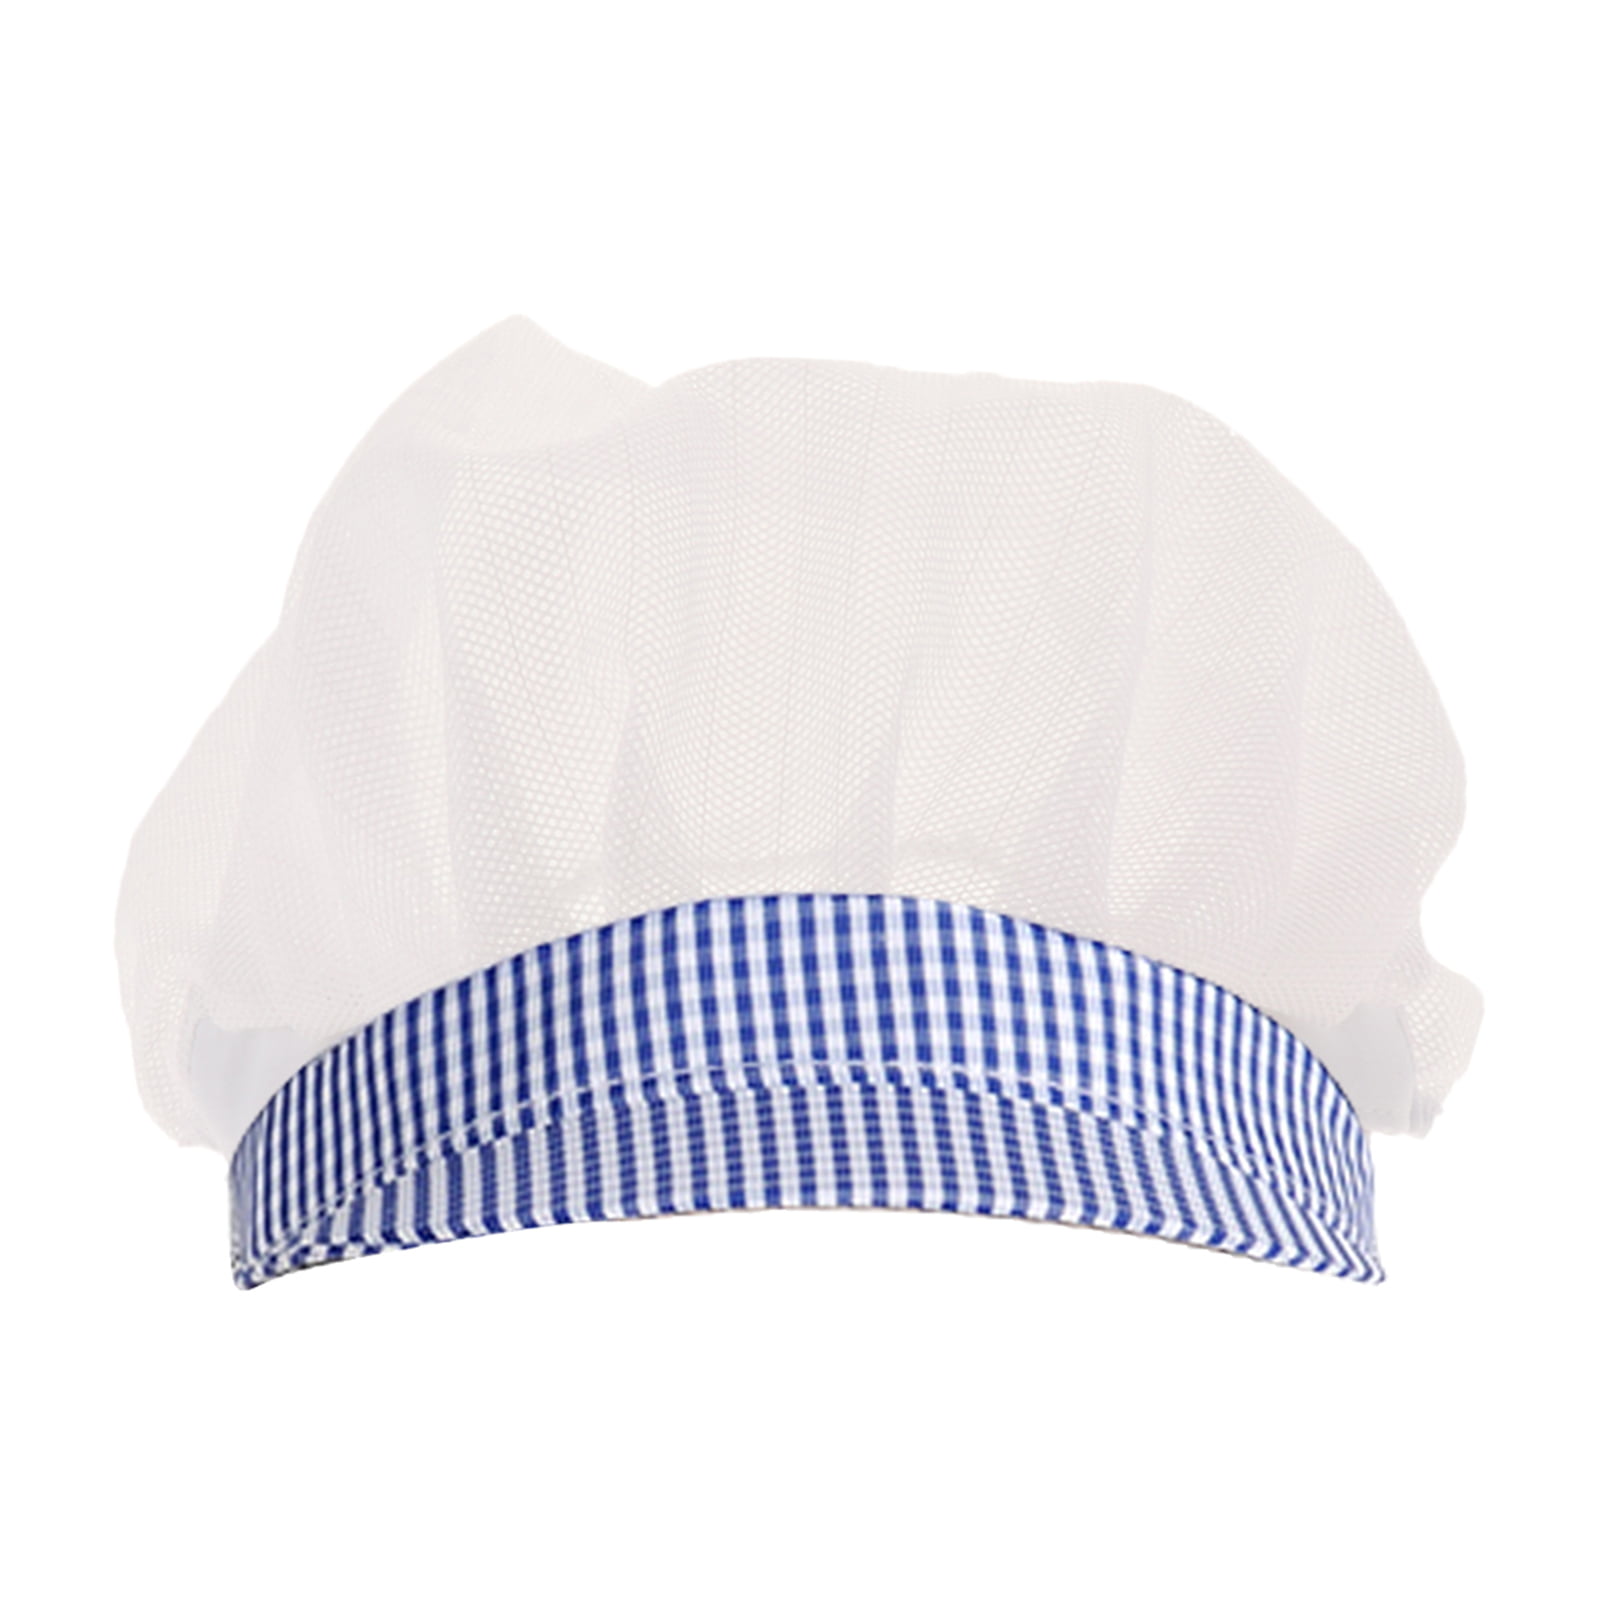 Not deformed not Details about   Chef Hat Kitchen Cooking Chef Cap Food Service Hair Nets 